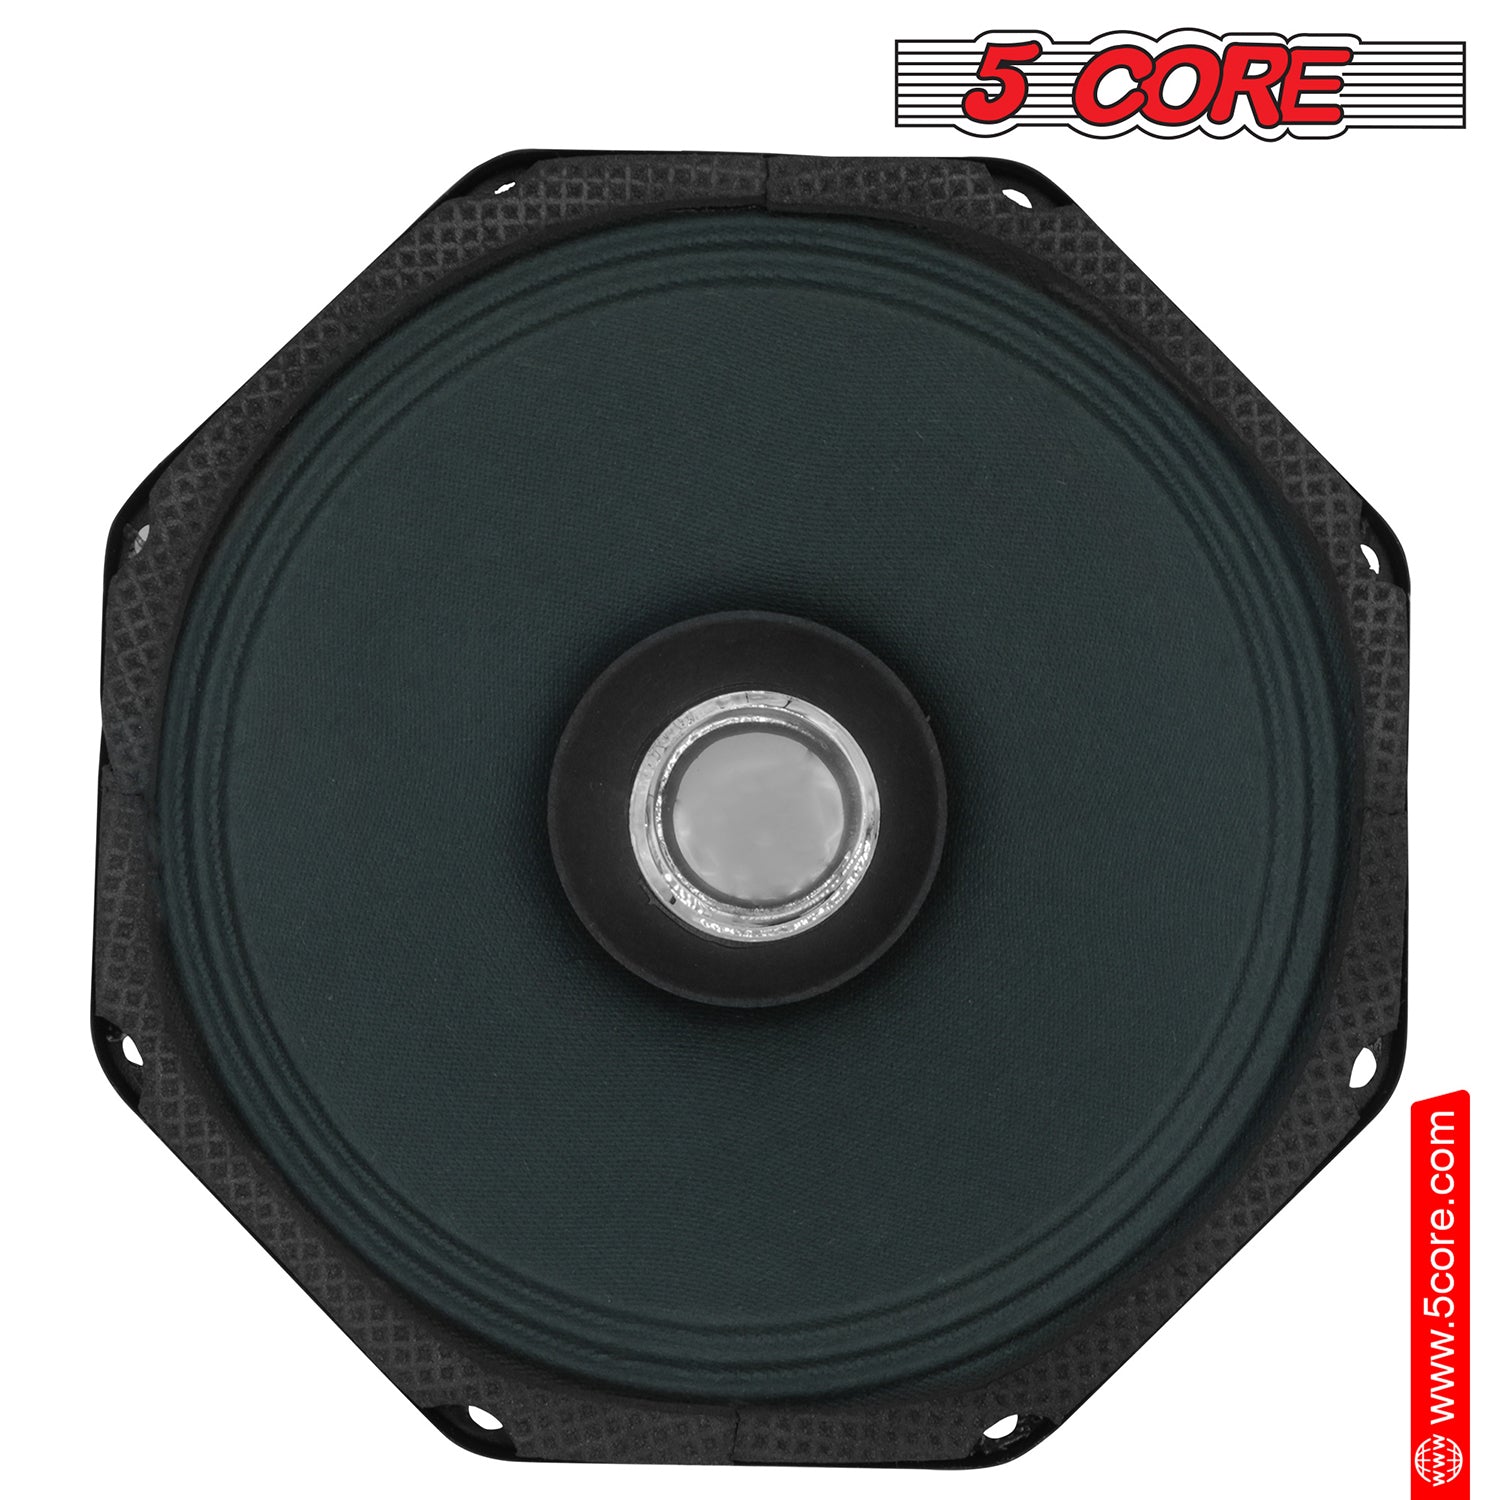 Upgrade Your Car Audio: 5 Core's 6-Inch Replacement Speaker